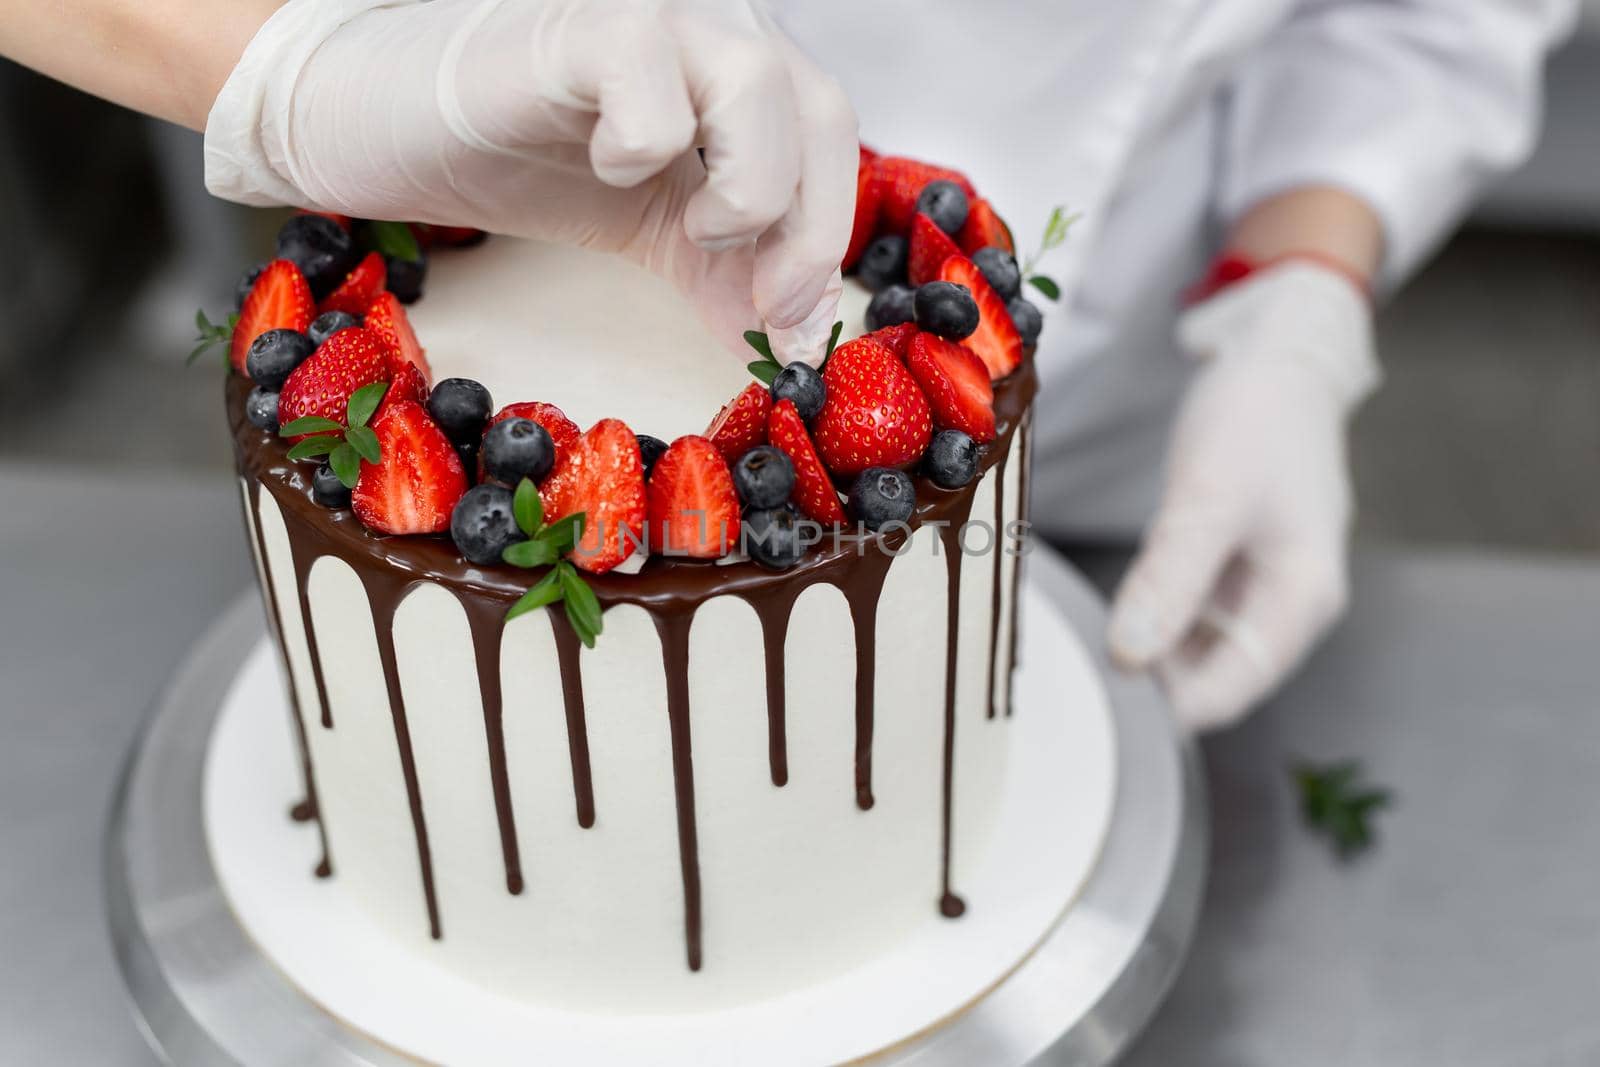 Pastry chef decorates the cake with chocolate levels of berries and mint by StudioPeace